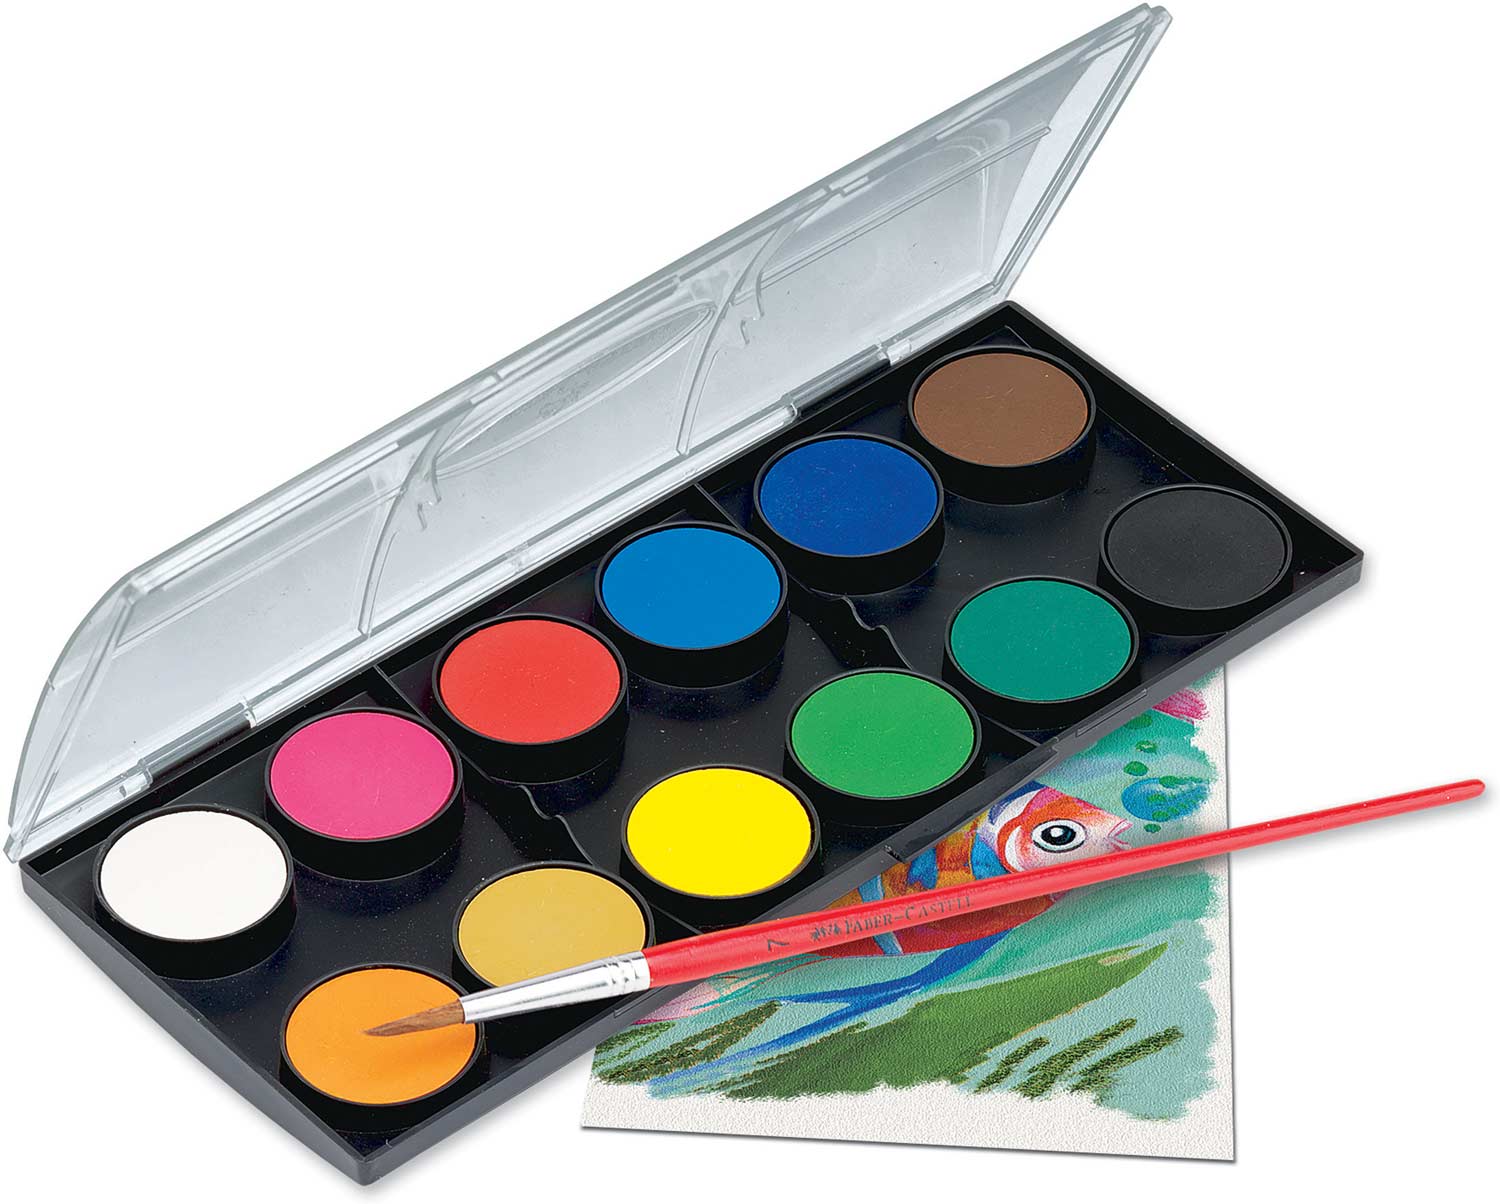 12 watercolor paint set - Givens Books and Little Dickens